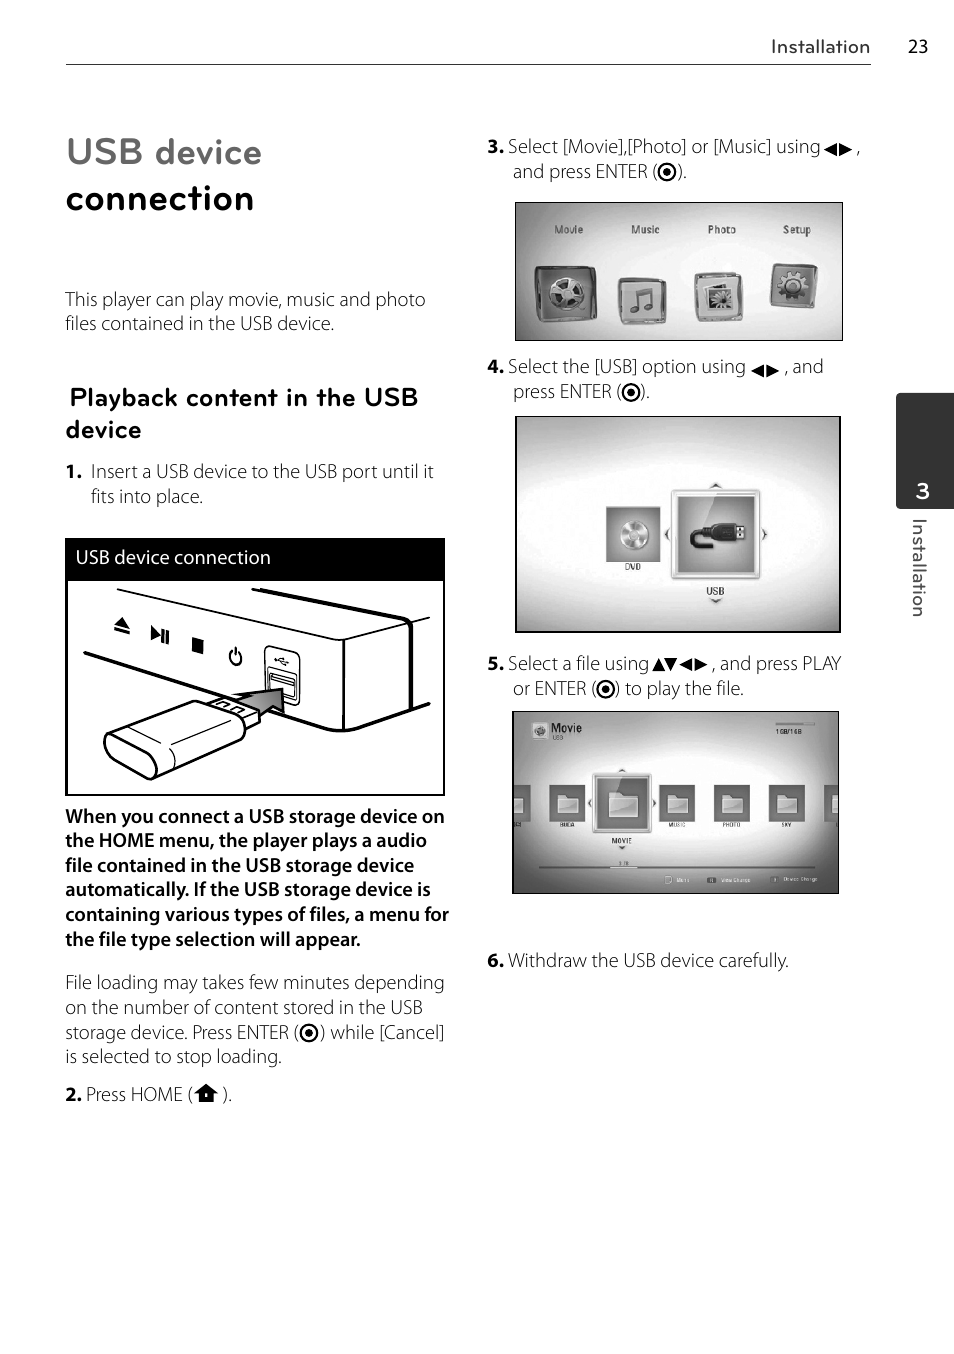 Usb device connection, Playback content in the usb device | LG BD678N User Manual | Page 23 / 72